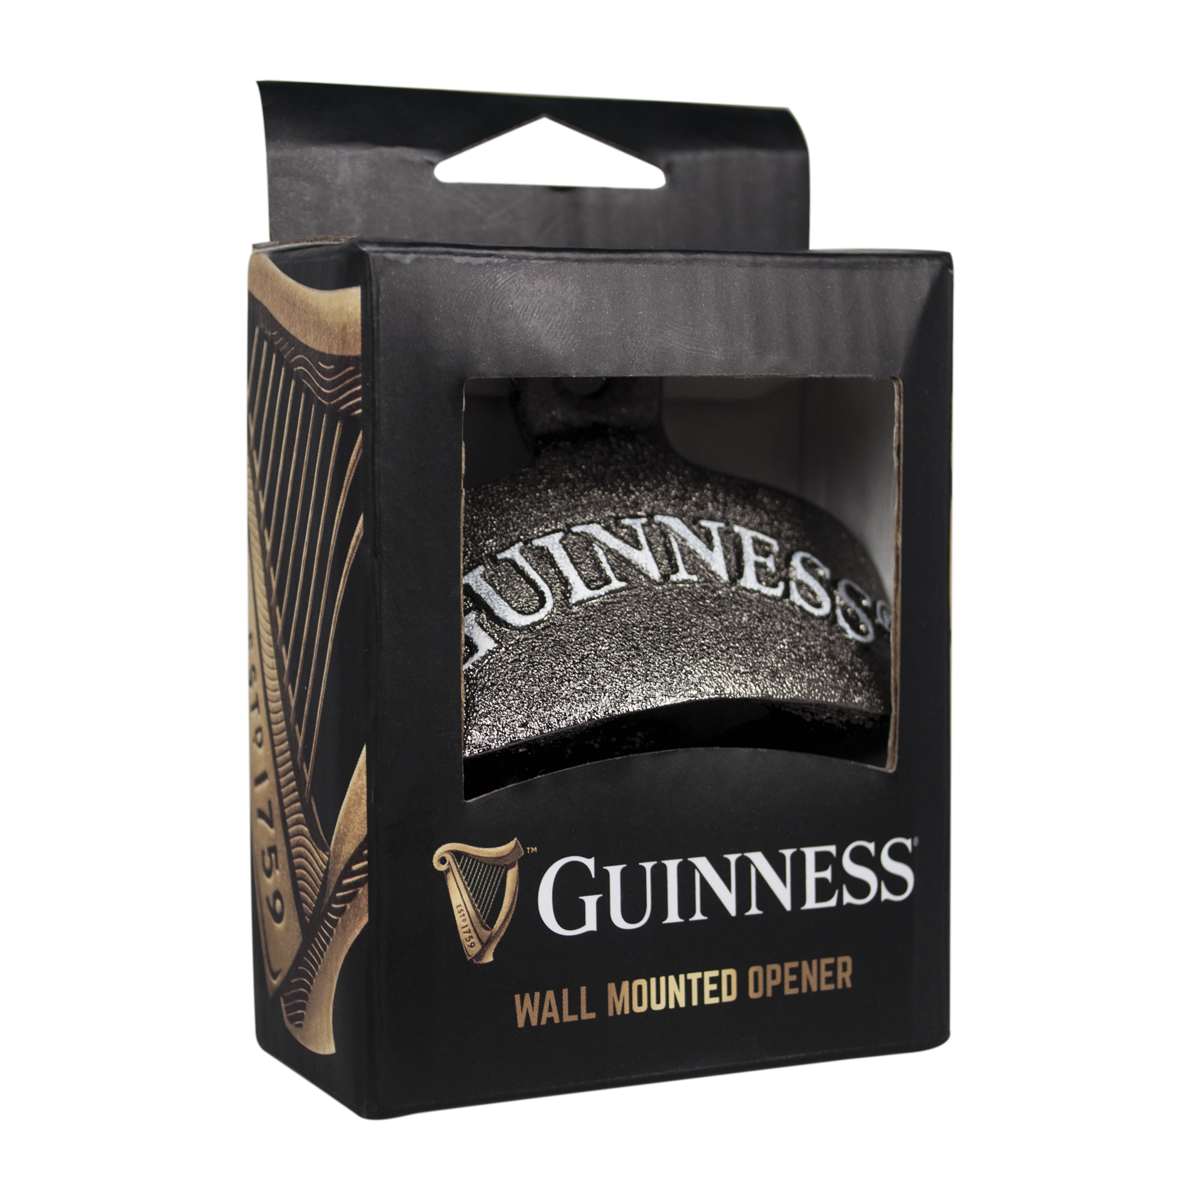 Guinness Wall Mounted Bottle Opener Boxed - the perfect gift for any beer lover.